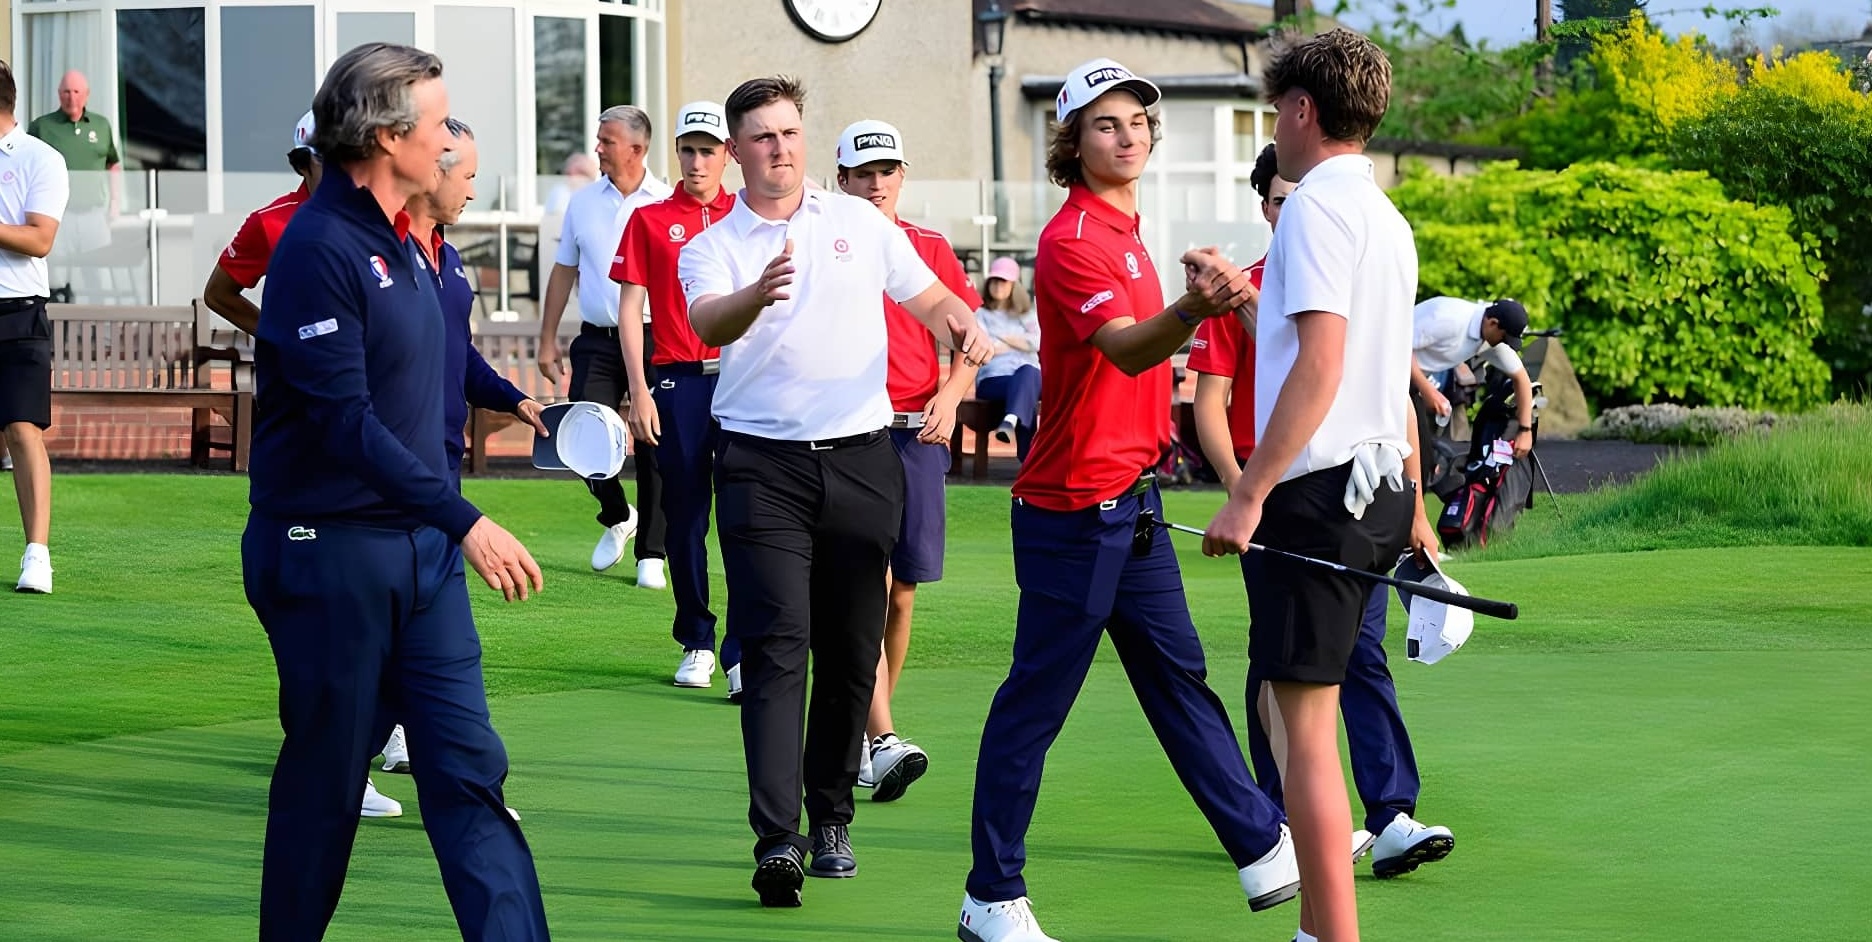 France Triumphs in Thrilling Golf Duel Against England at Moortown